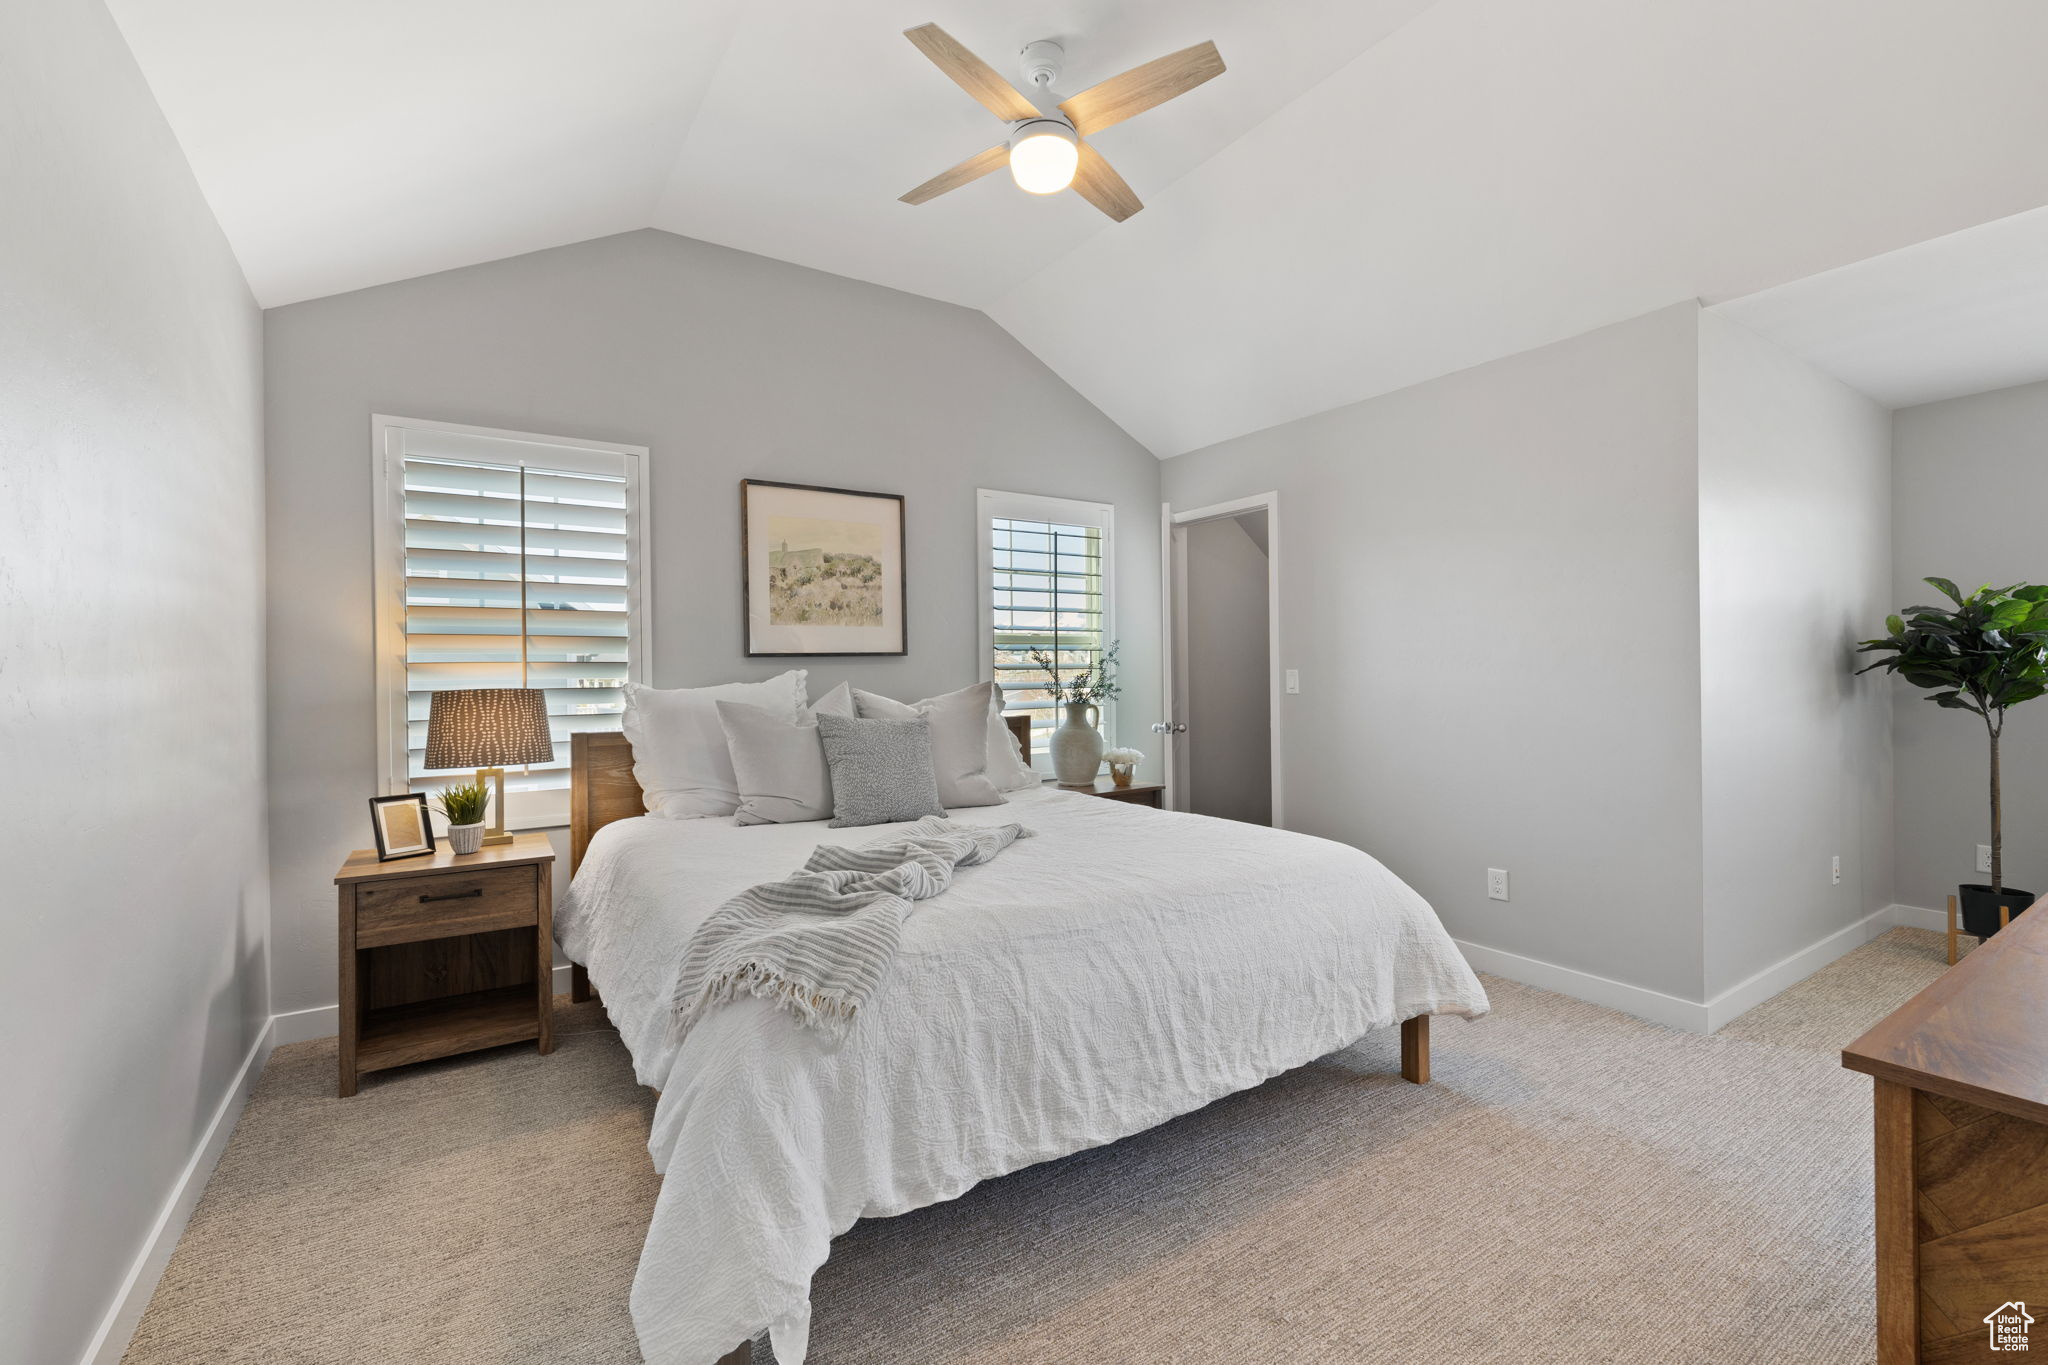 Bedroom with light colored carpet, vaulted ceiling, multiple windows, and ceiling fan